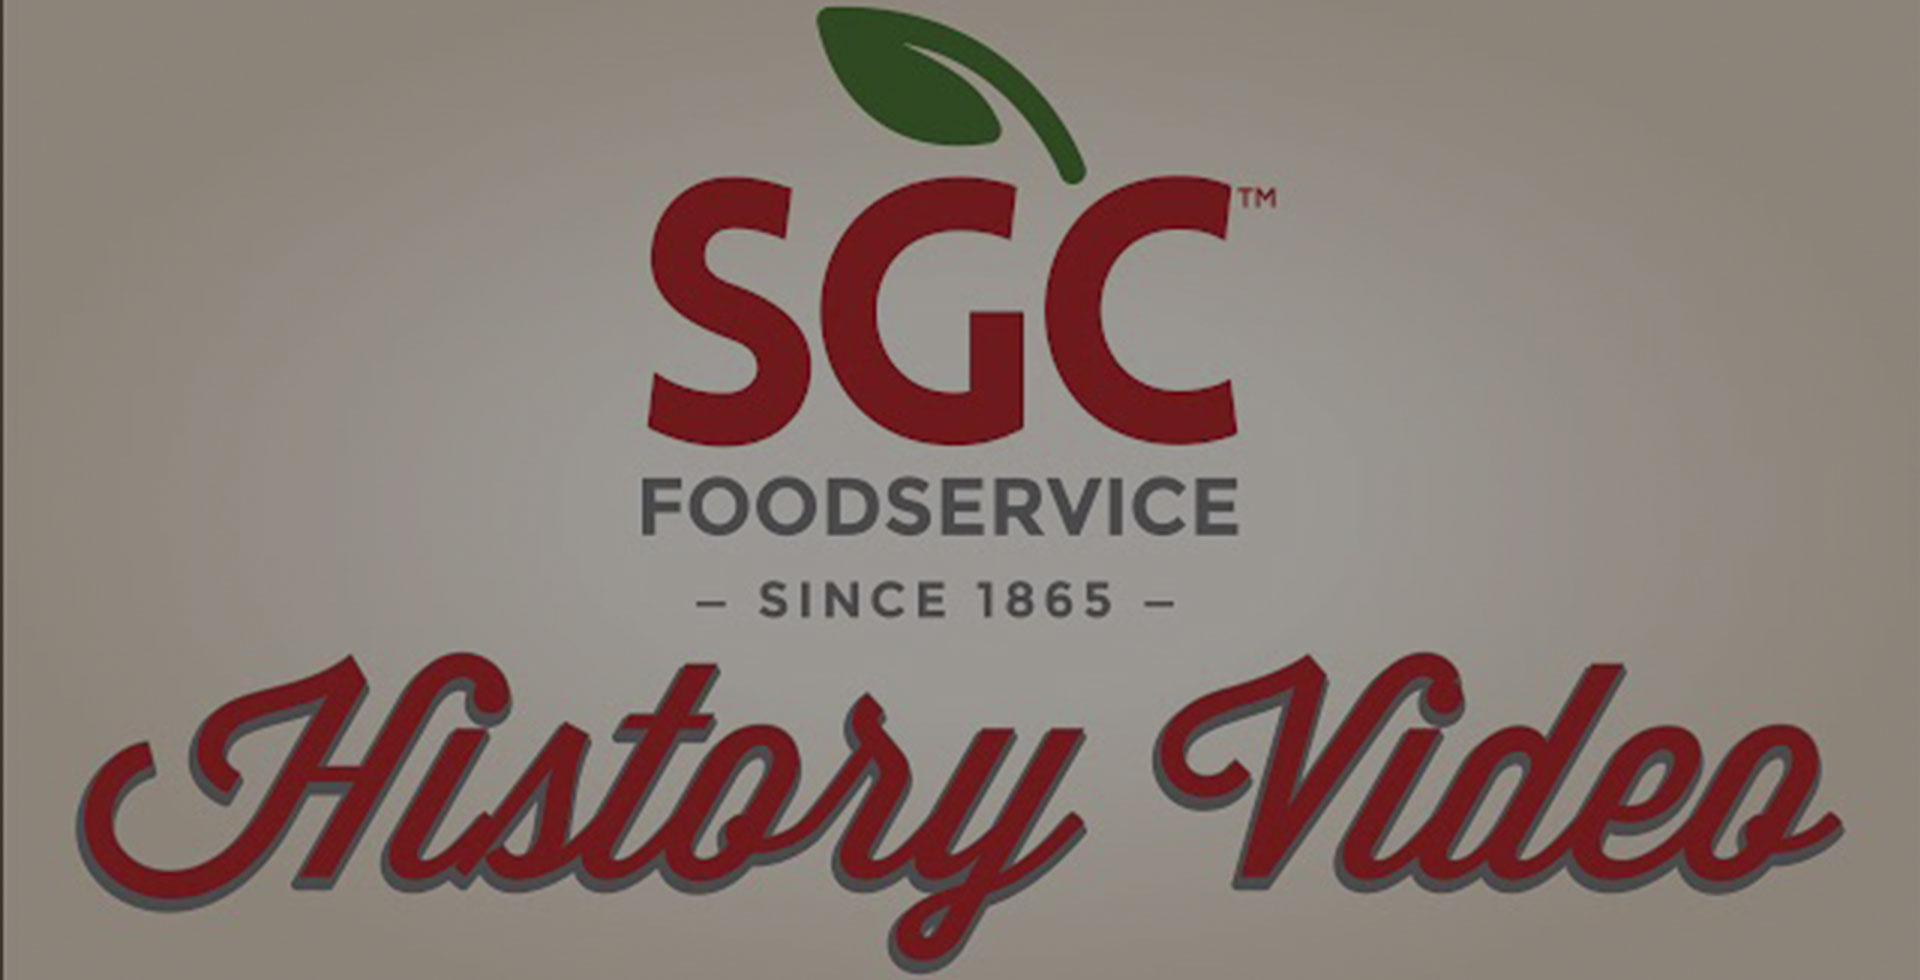 SGC Foodservice History Video Background
